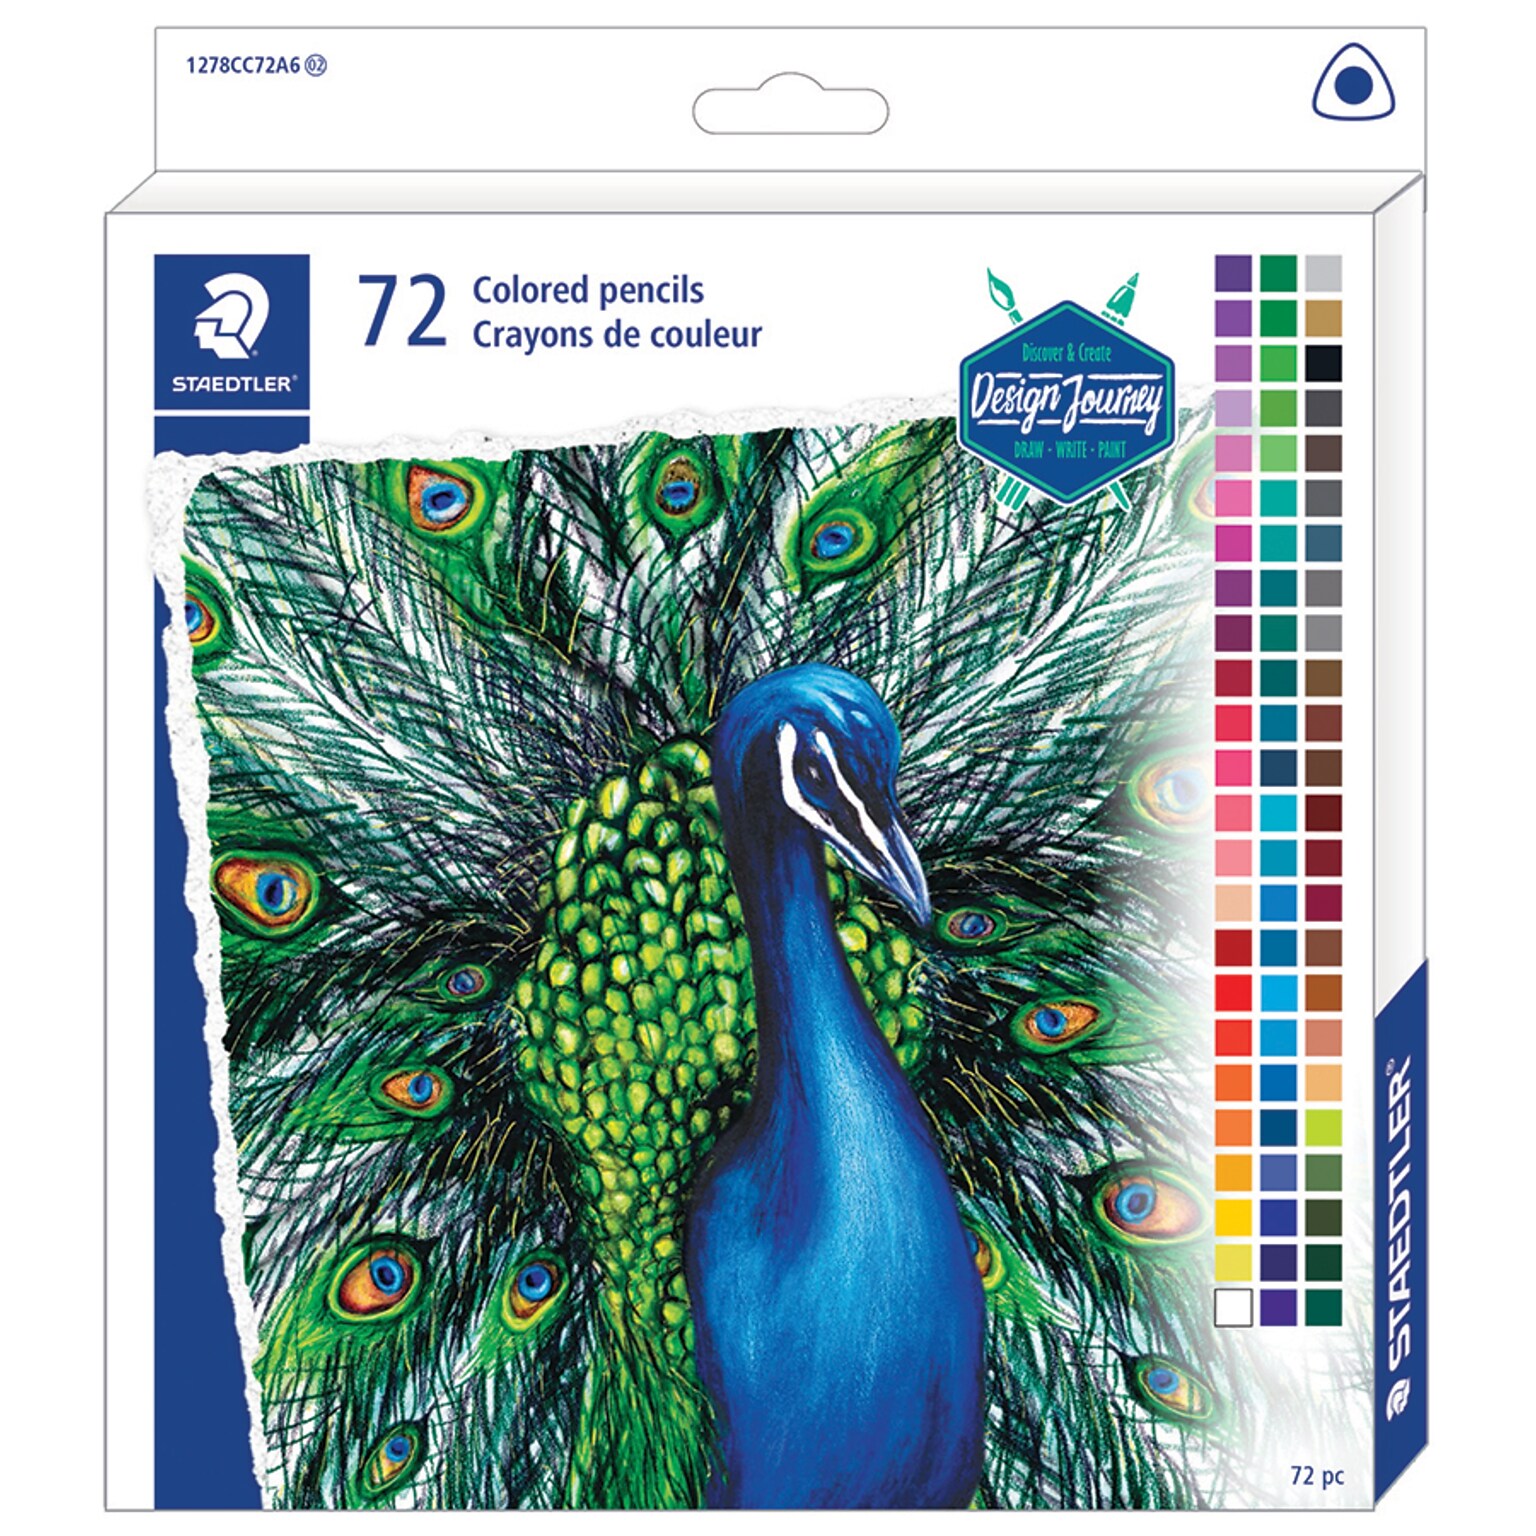 Staedtler Triangular Professional Colored Pencils, Assorted Colors, 72/Pack (1278CC72A6)